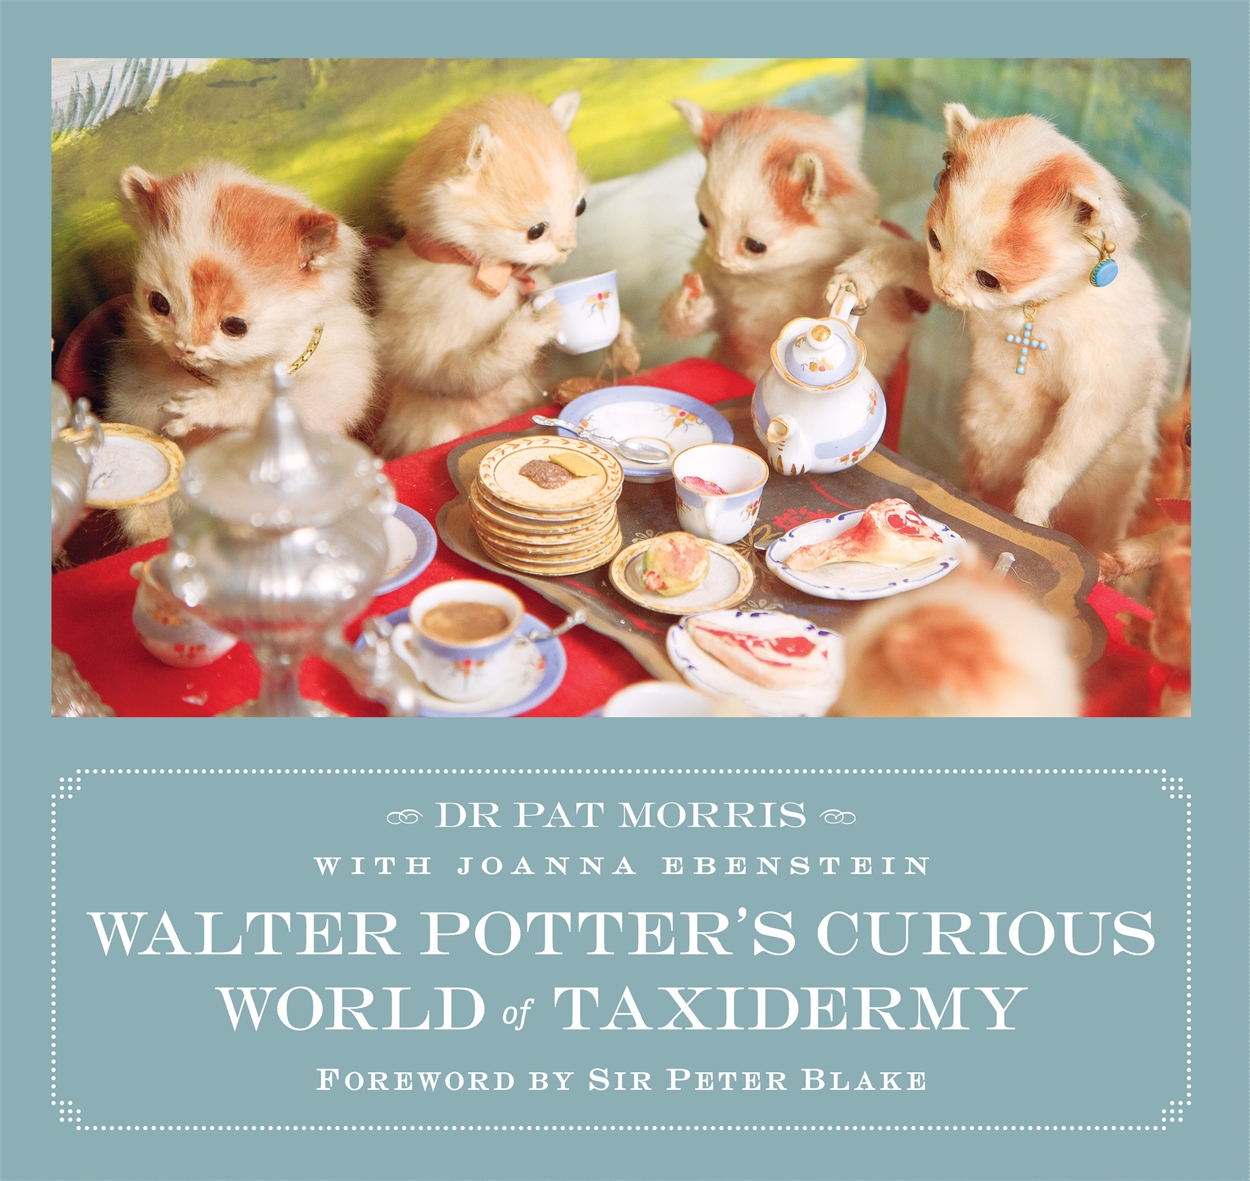 Walter Potter's Curious World of Taxidermy by Pat Morris | Hachette UK